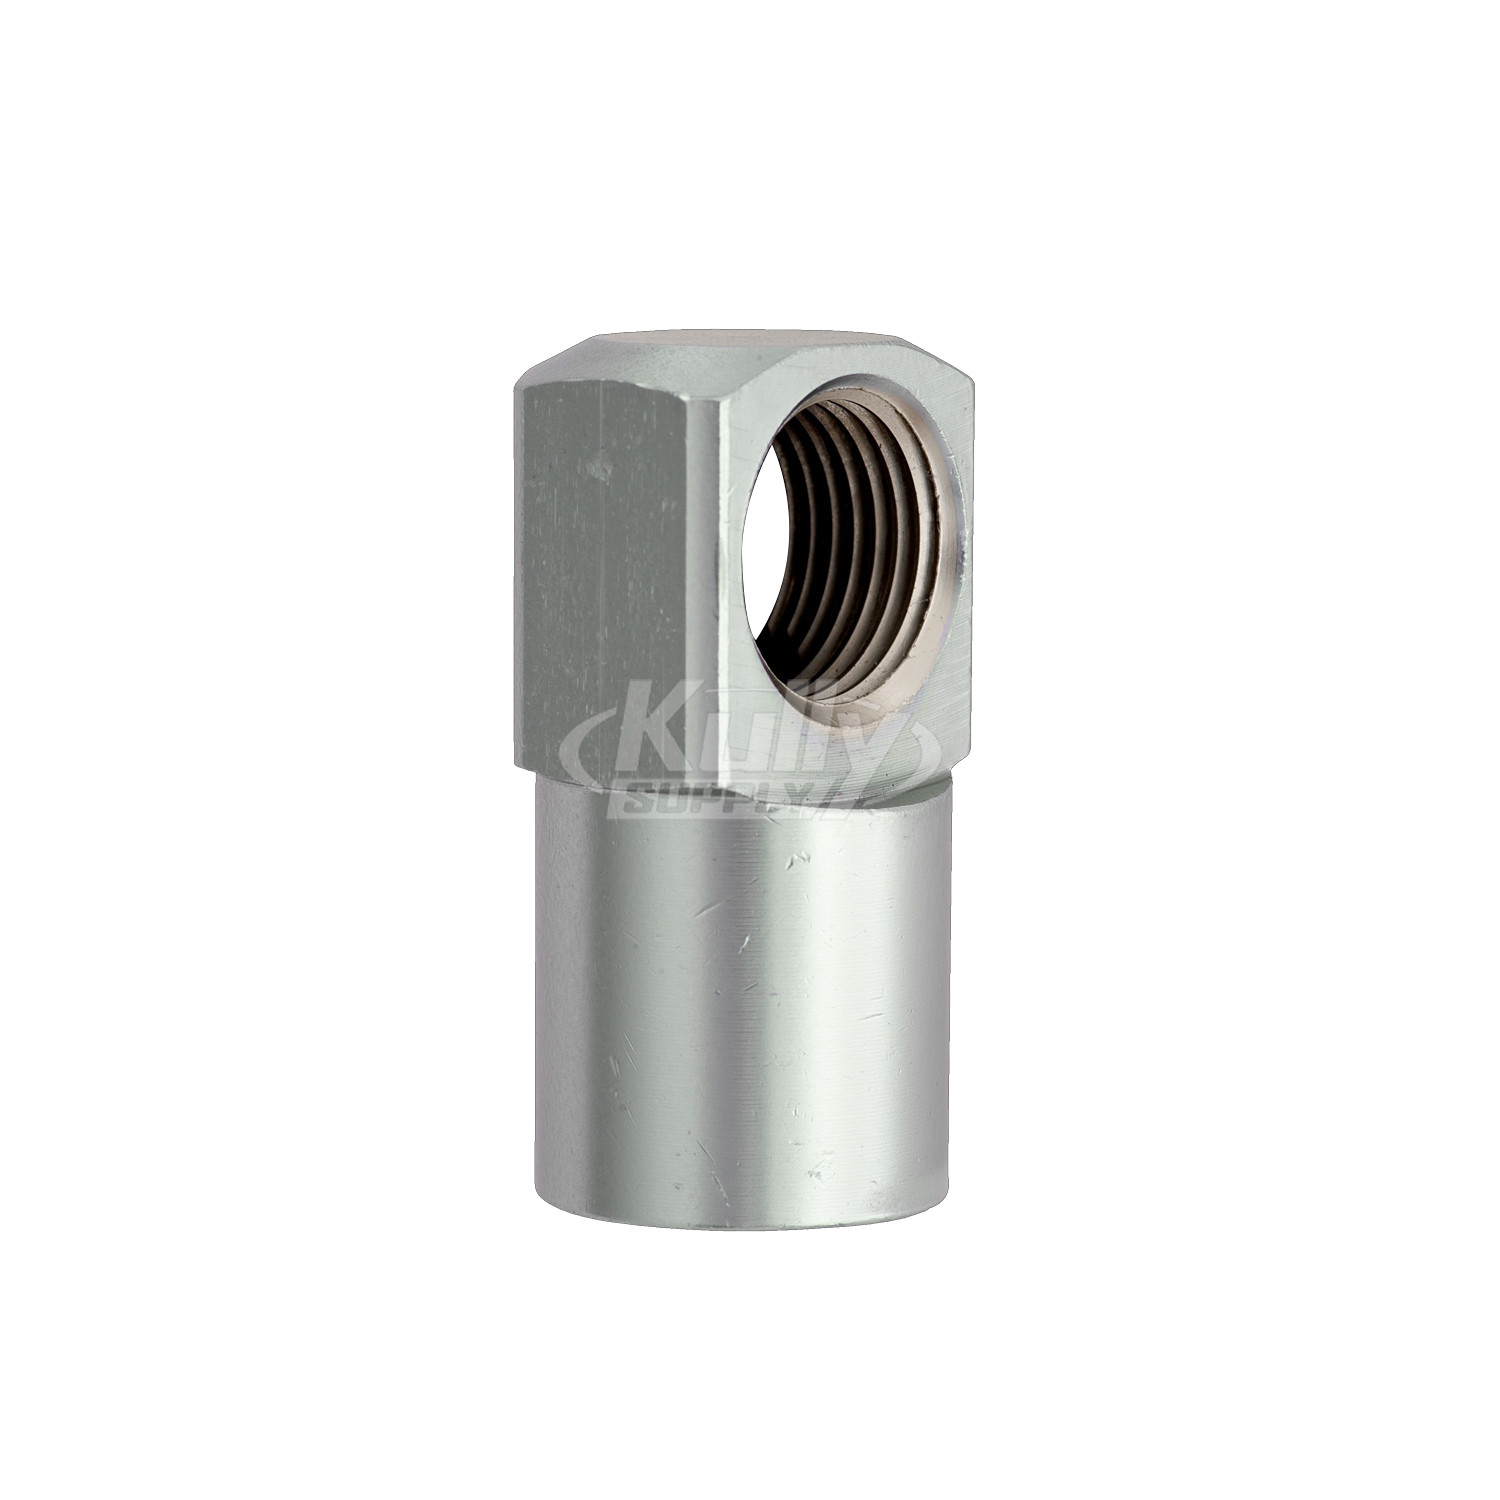 Fisher 71447 Stainless Steel Elbow Close 1/2F 2Ea